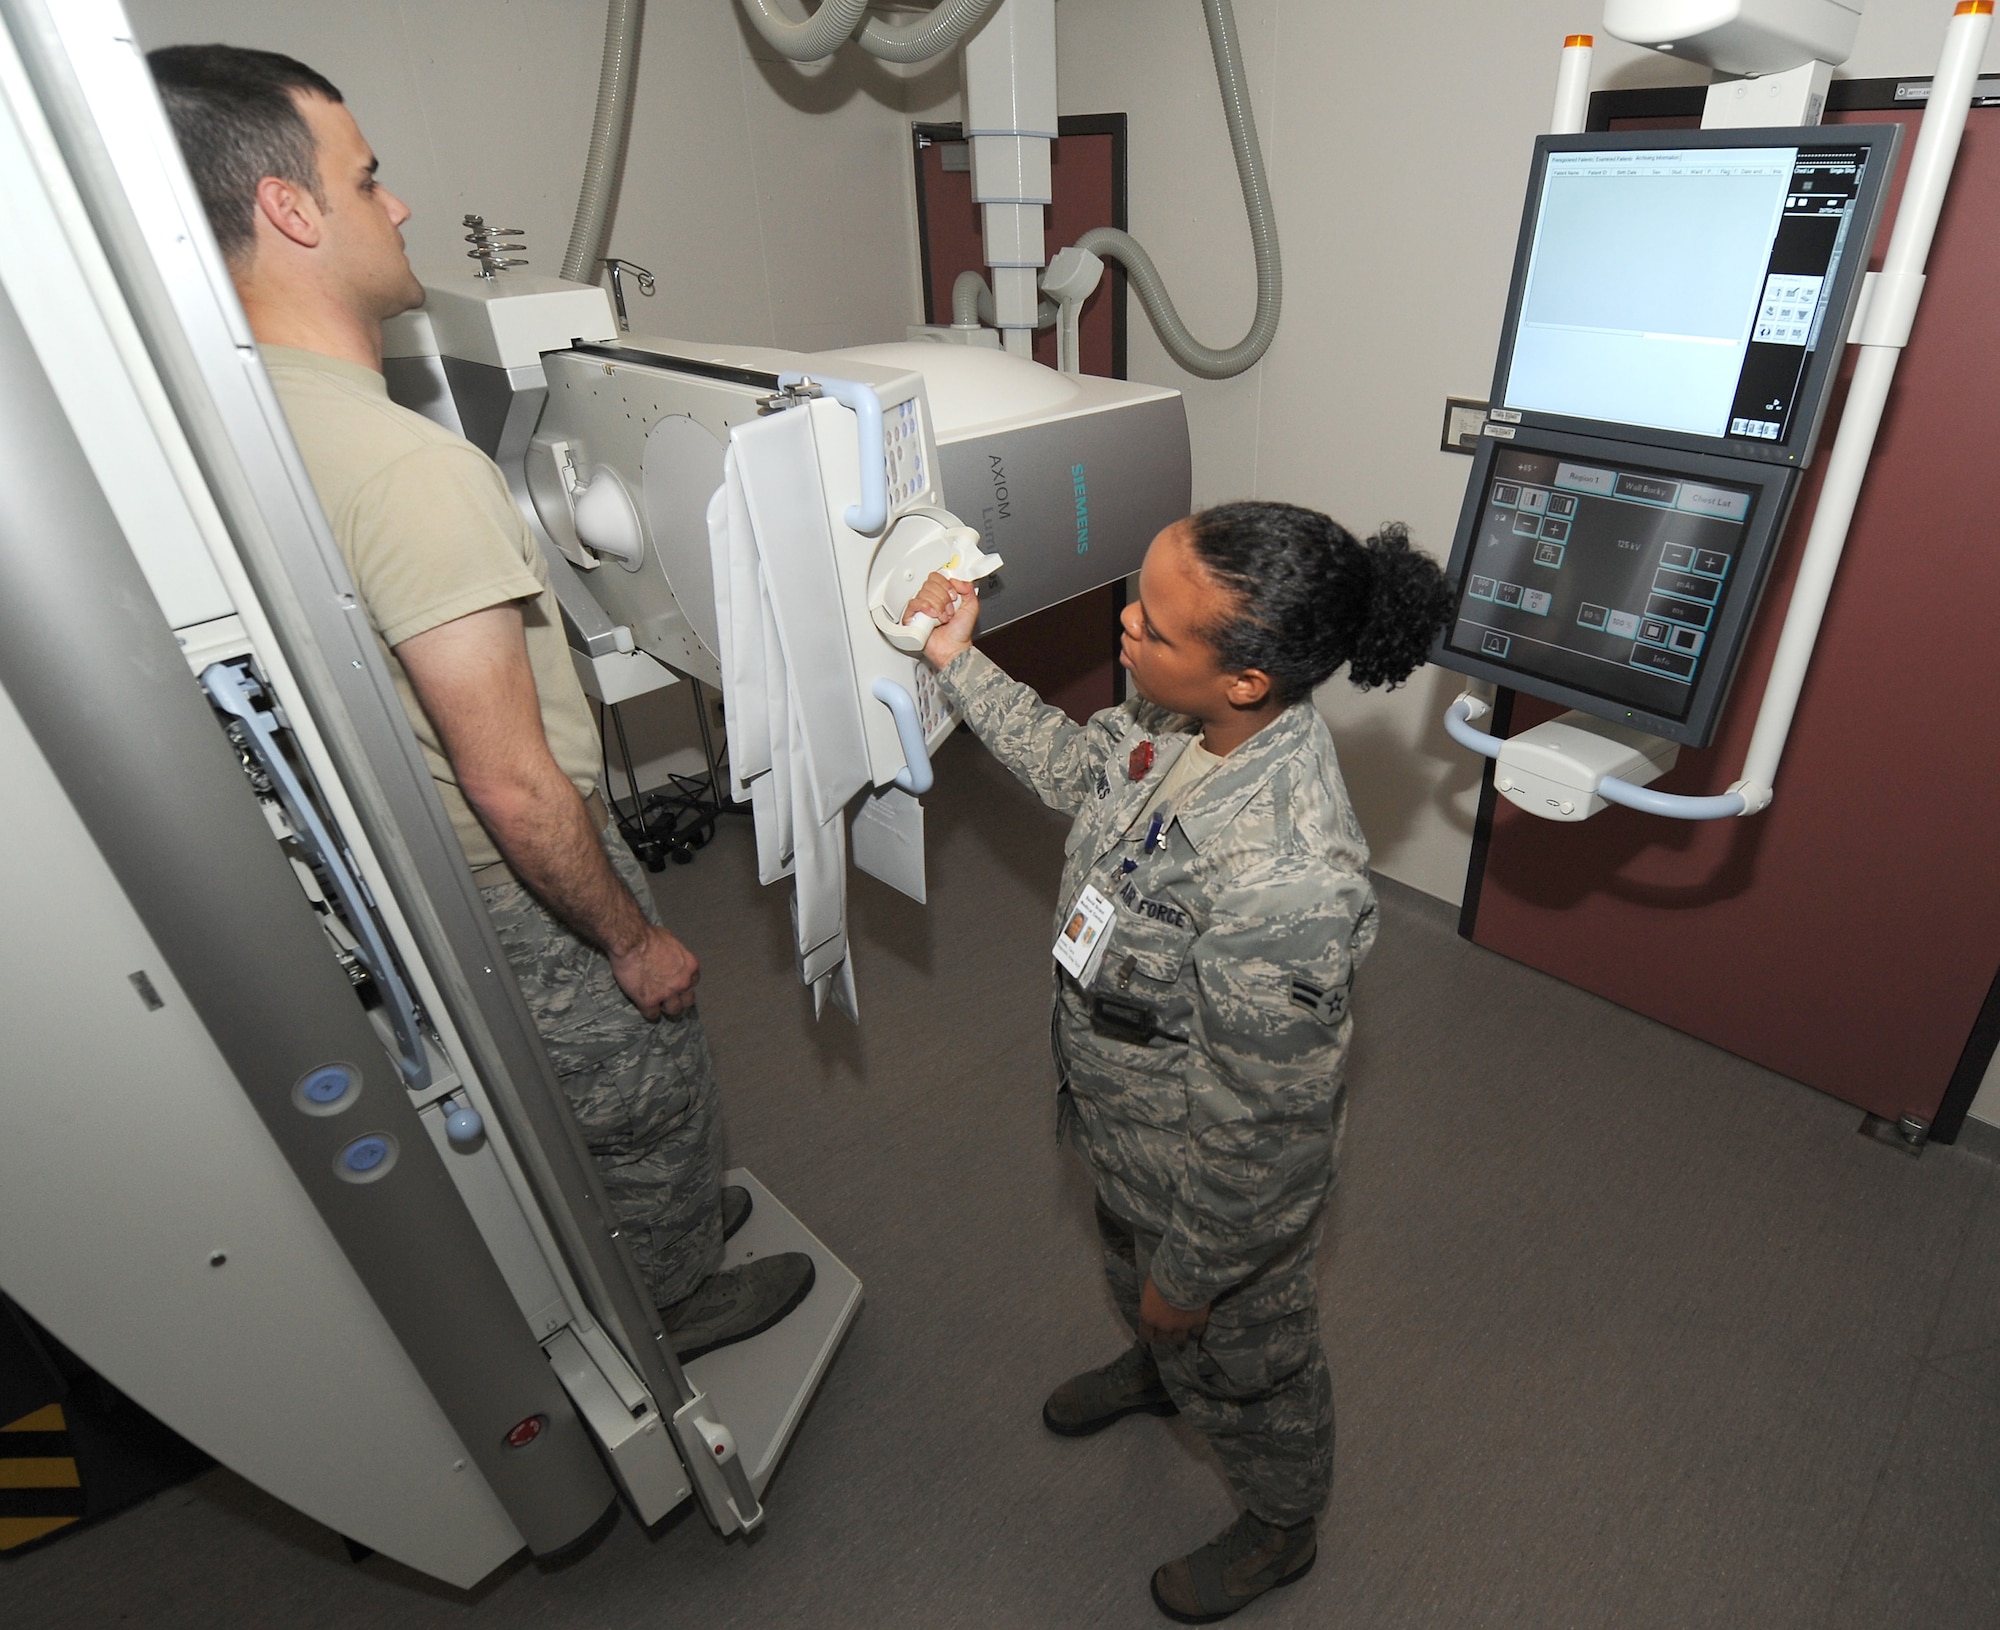 Airman 1st Class Tara Jones, diagnostic imaging technologist, demonstrates fluoroscopy Nov. 9 at the David Grant USAF Medical Center. Fluoroscopy is an imaging technique commonly used by physicians to obtain real-time moving images of the internal structures of a patient through the use of a fluoroscope. (U.S. Air Force photo/Staff Sgt. Liliana Moreno)